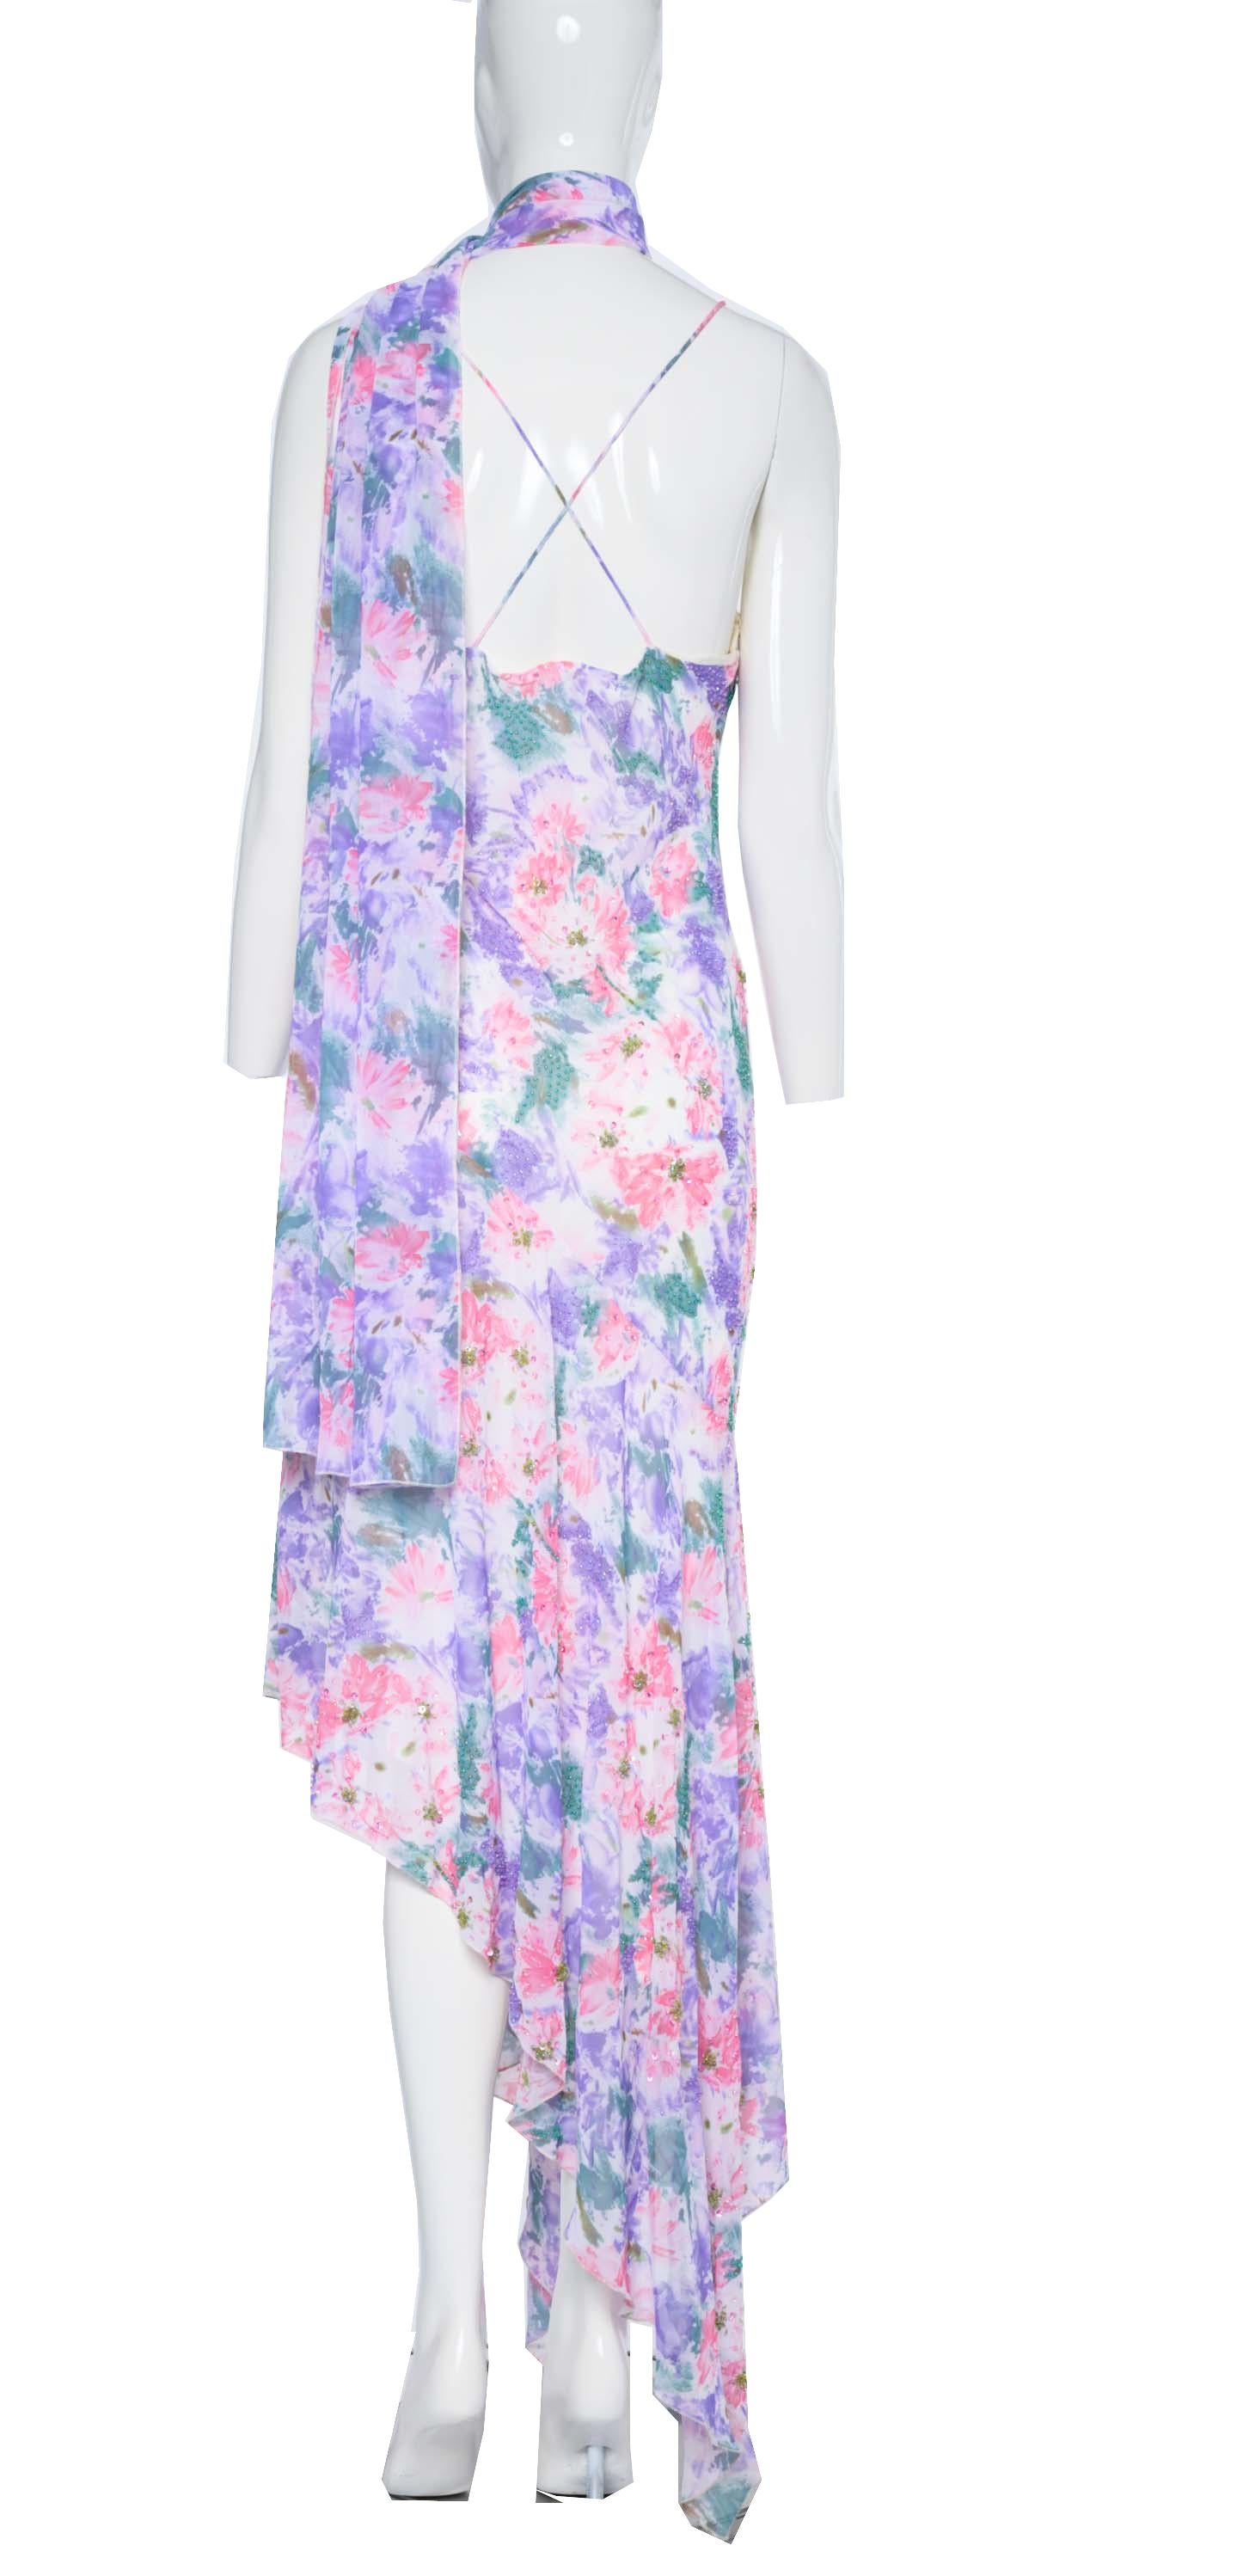 This vintage Diane Freis dress, with its beautiful purple and pink floral print on an ivory background, is perfect for a variety of occasions. Whether you are going to a garden party, a wedding, or a night out, this dress will make you feel like a